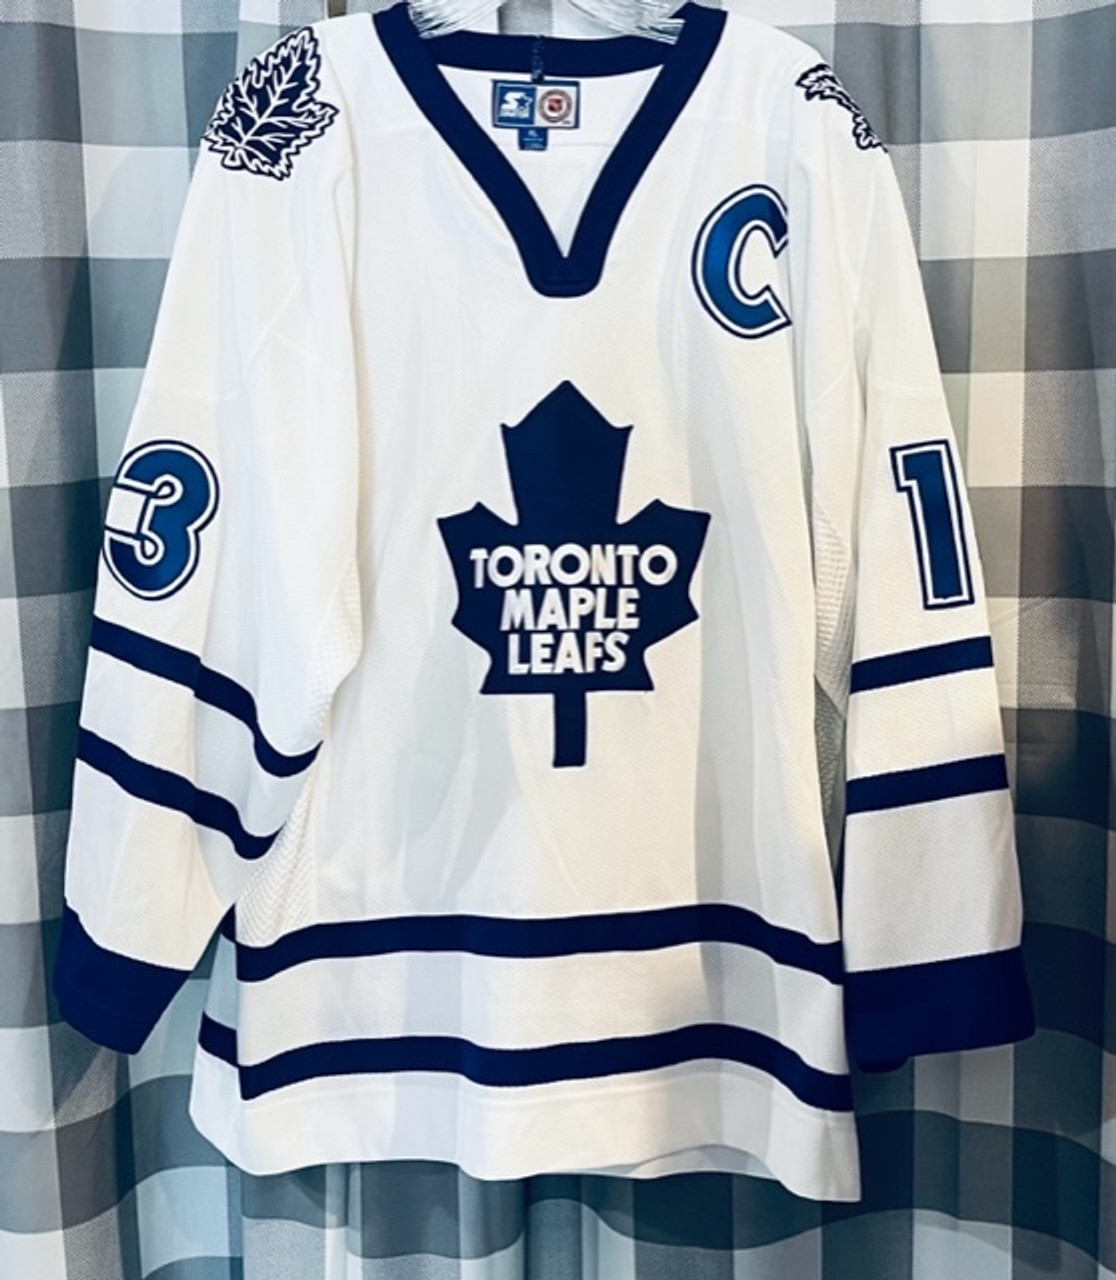 Best and worst sweaters of all-time: Toronto Maple Leafs - NBC Sports